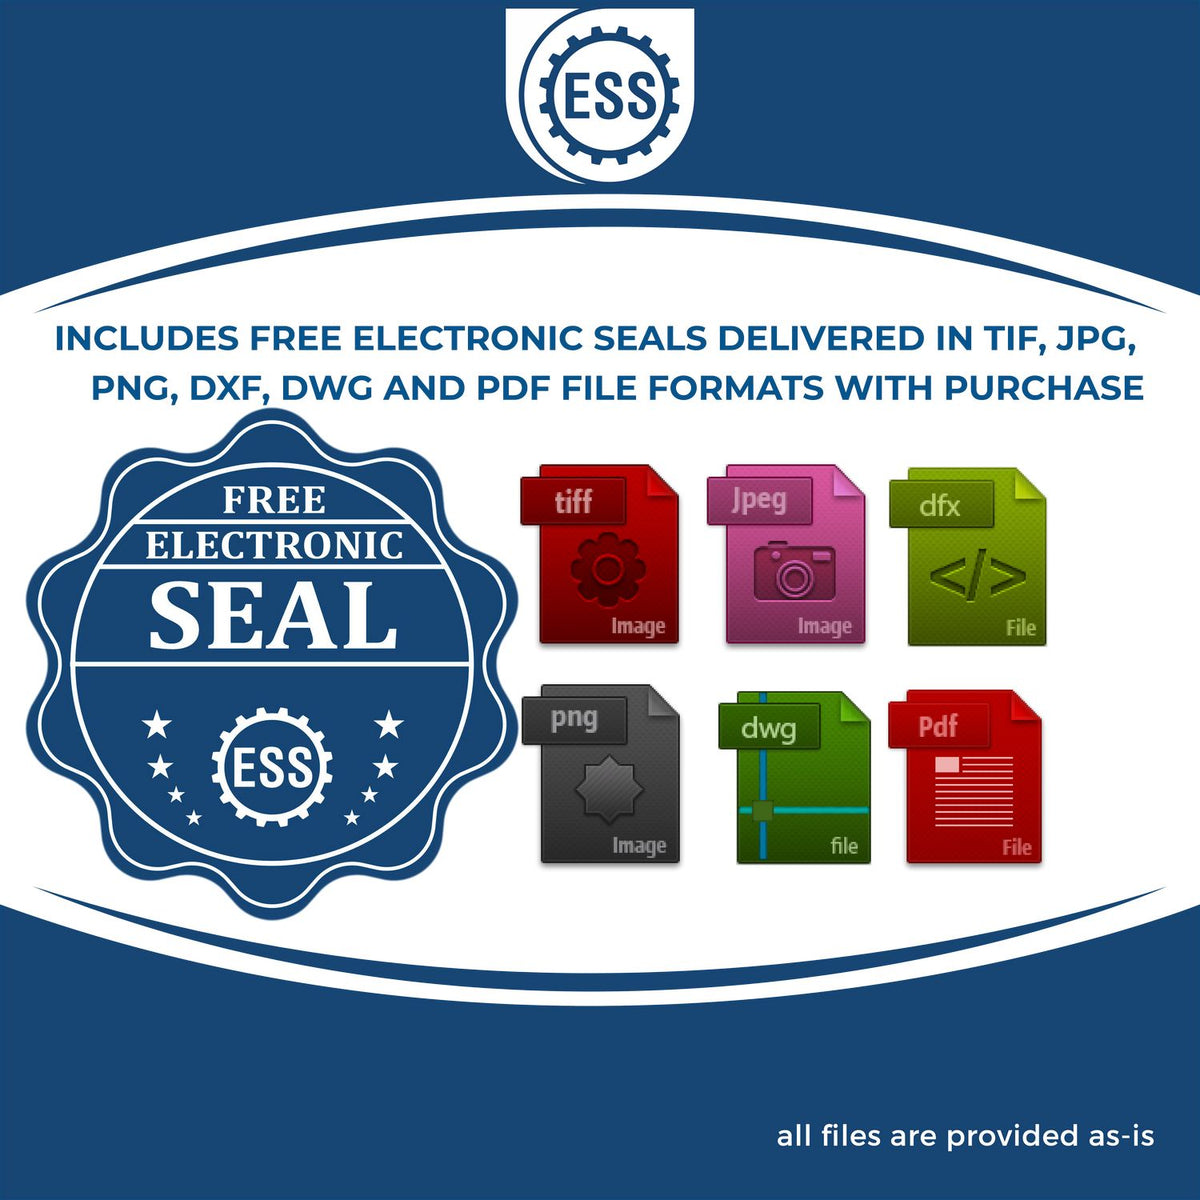 An infographic for the free electronic seal for the Gift Florida Land Surveyor Seal illustrating the different file type icons such as DXF, DWG, TIF, JPG and PNG.